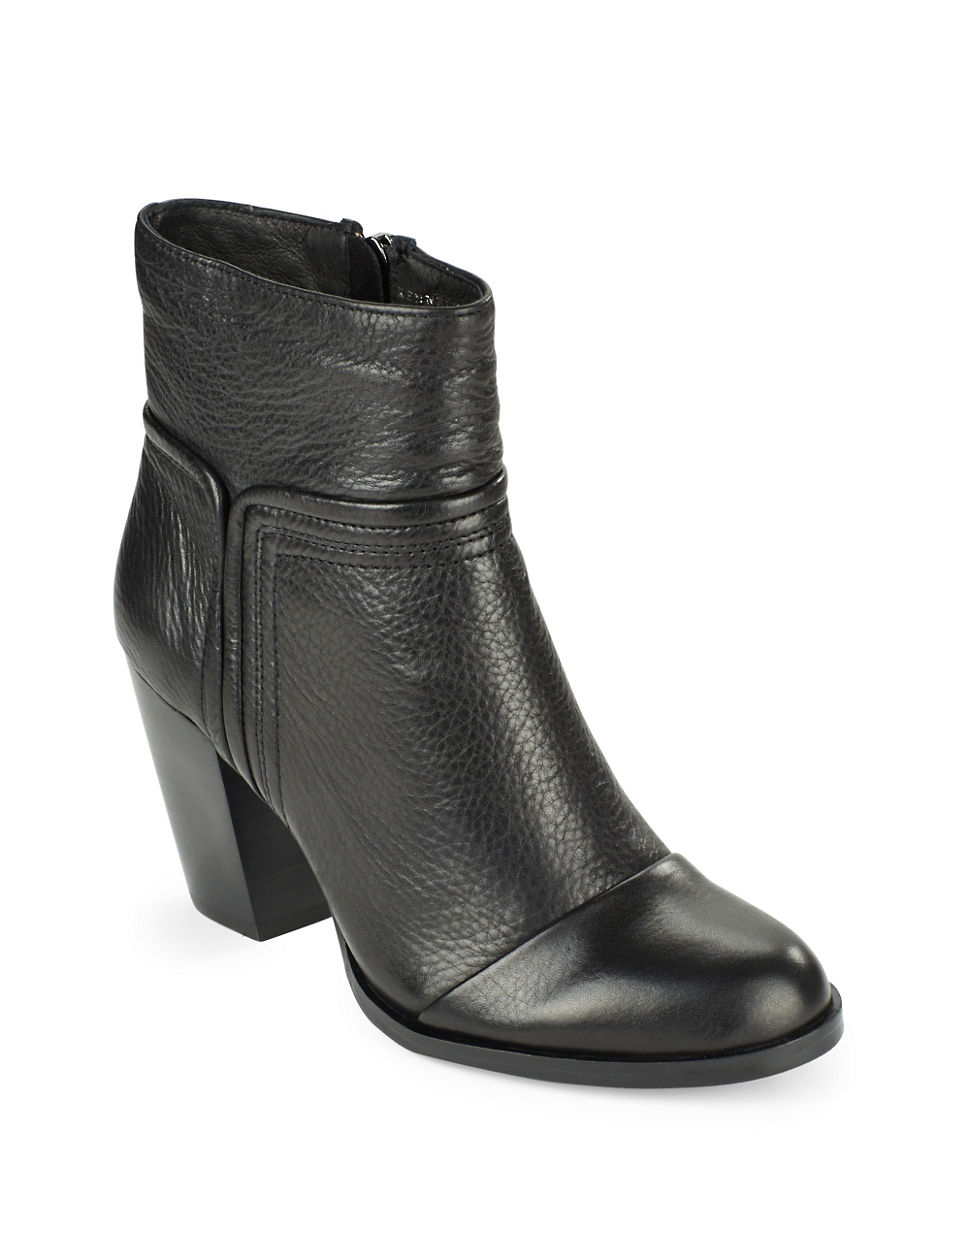 Lyst - Kenneth Cole Natalie Leather Ankle Boots in Black